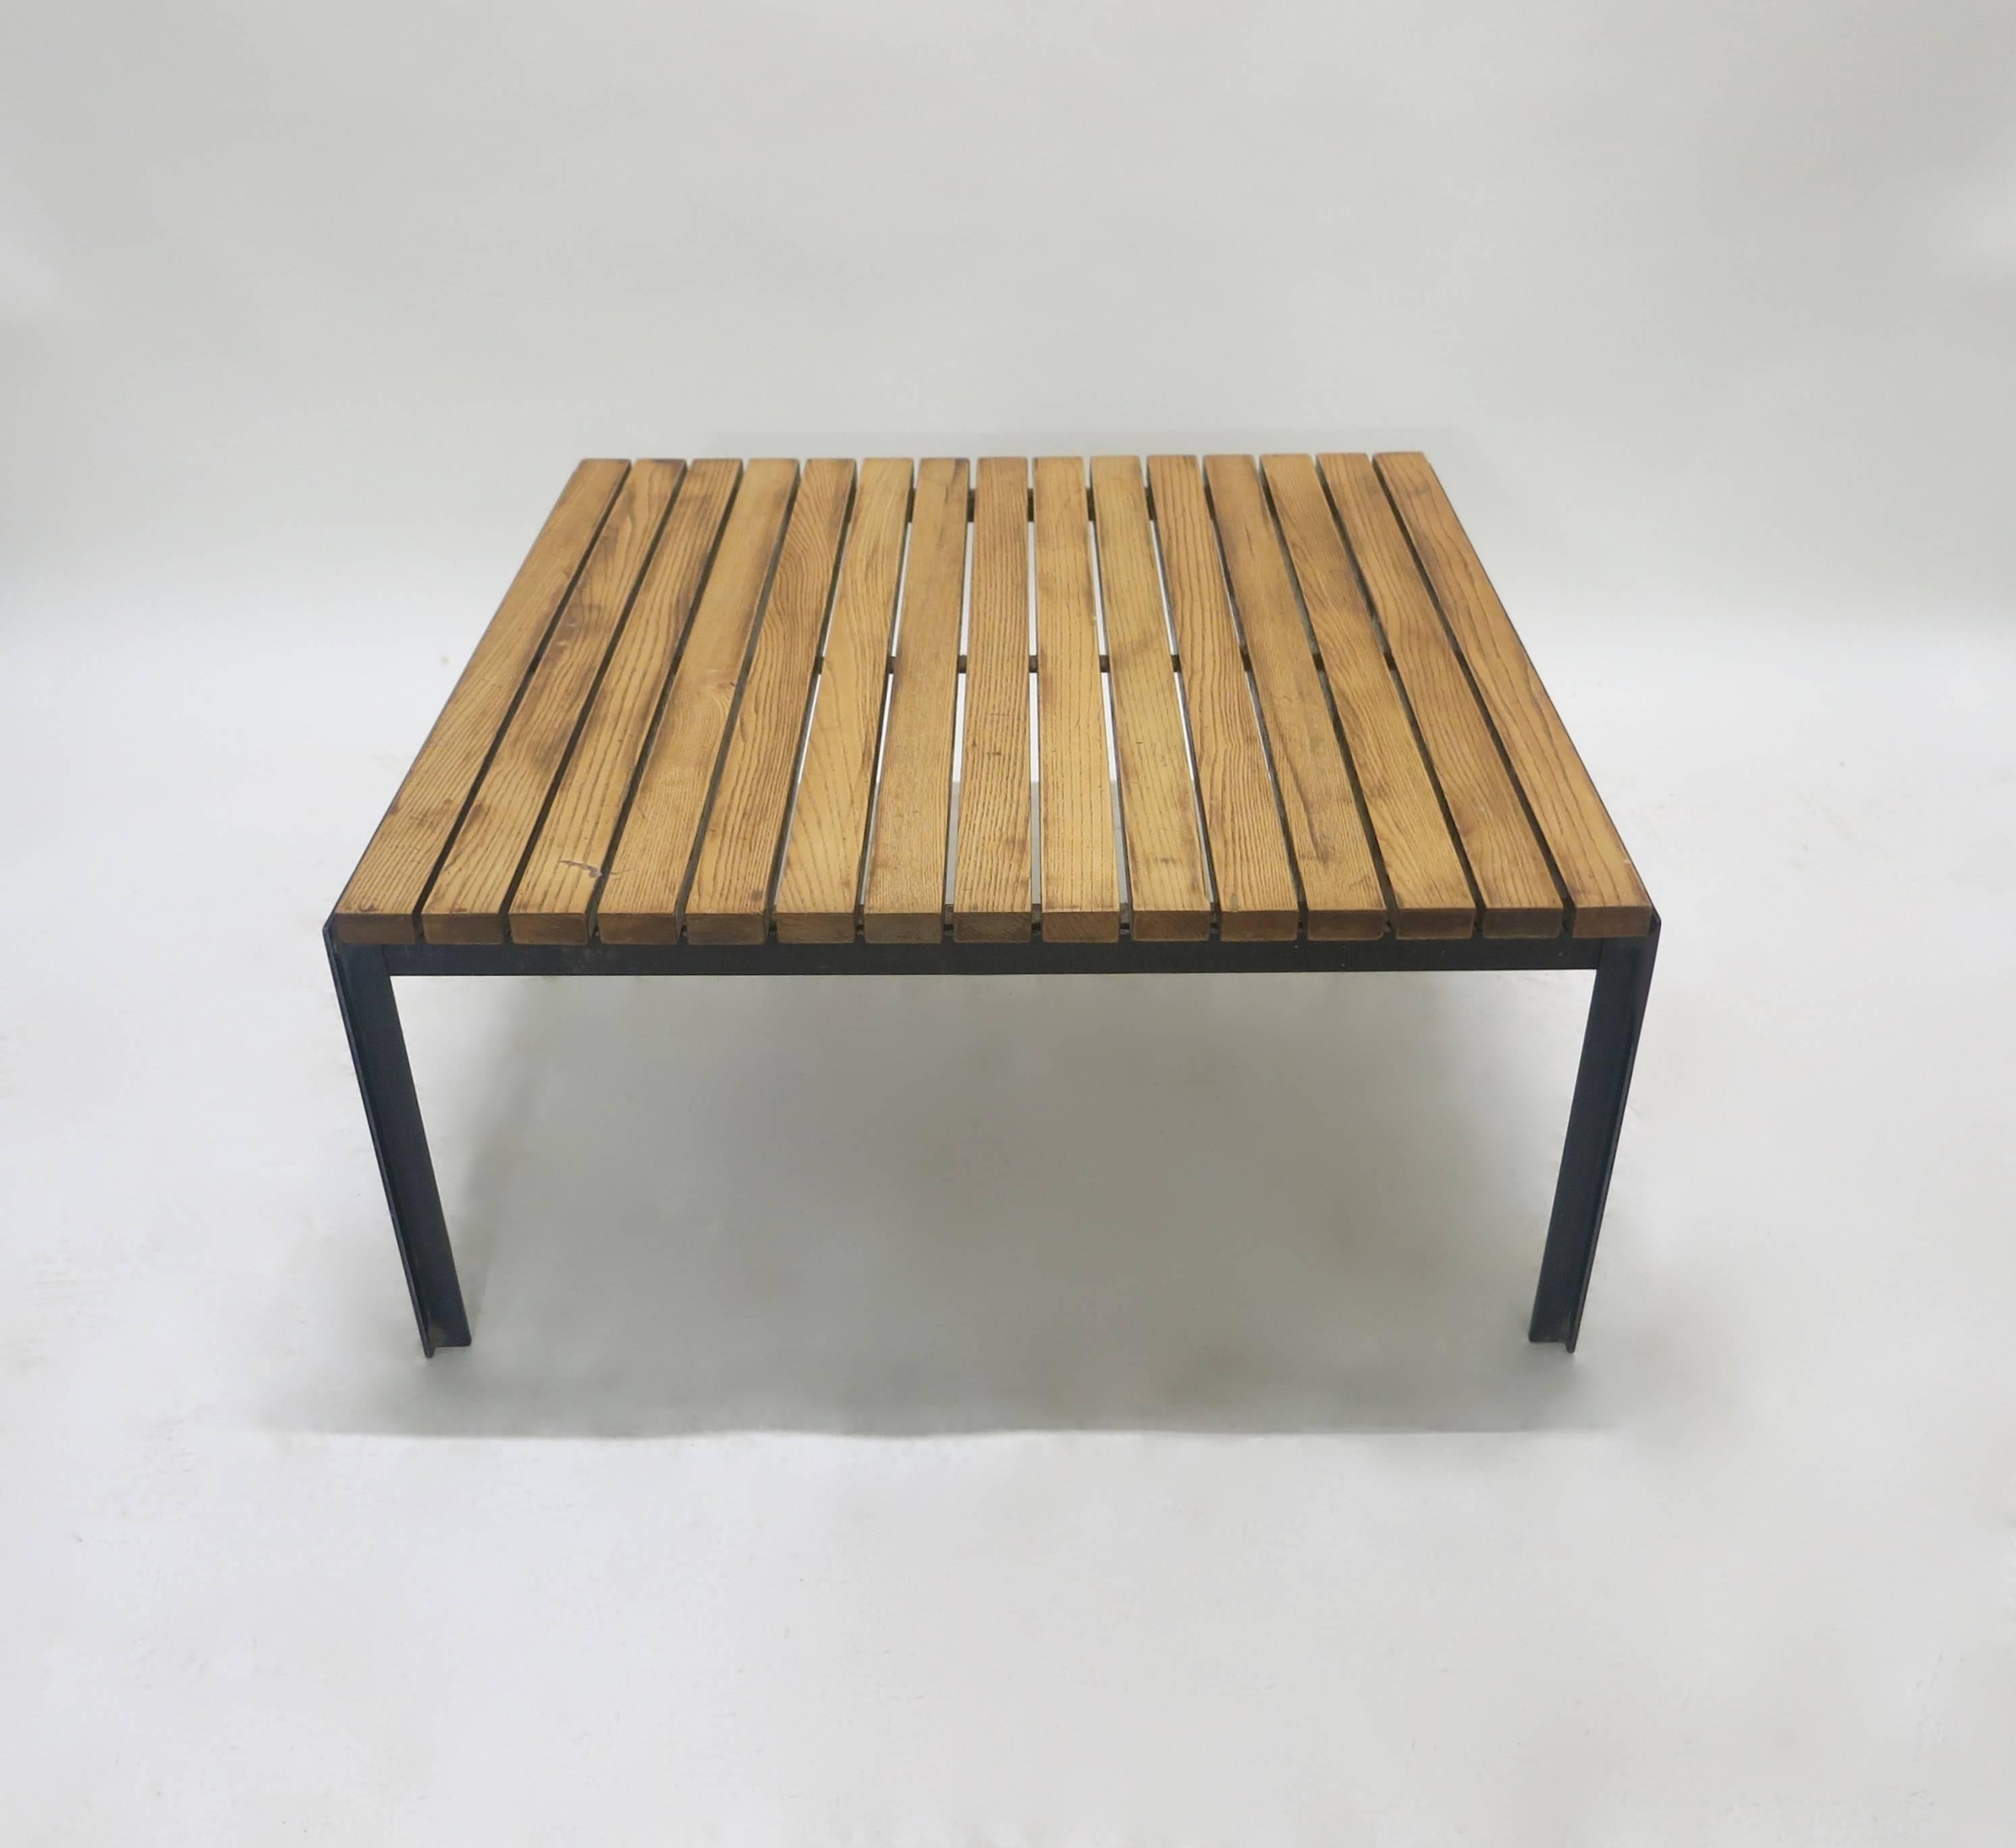 Florence Knoll's black enameled steel T-Bar table with a slatted oak top comprises 15 slats, all in very good original condition. The table is a great vintage example still with an early manufacturer's label underneath. 


 